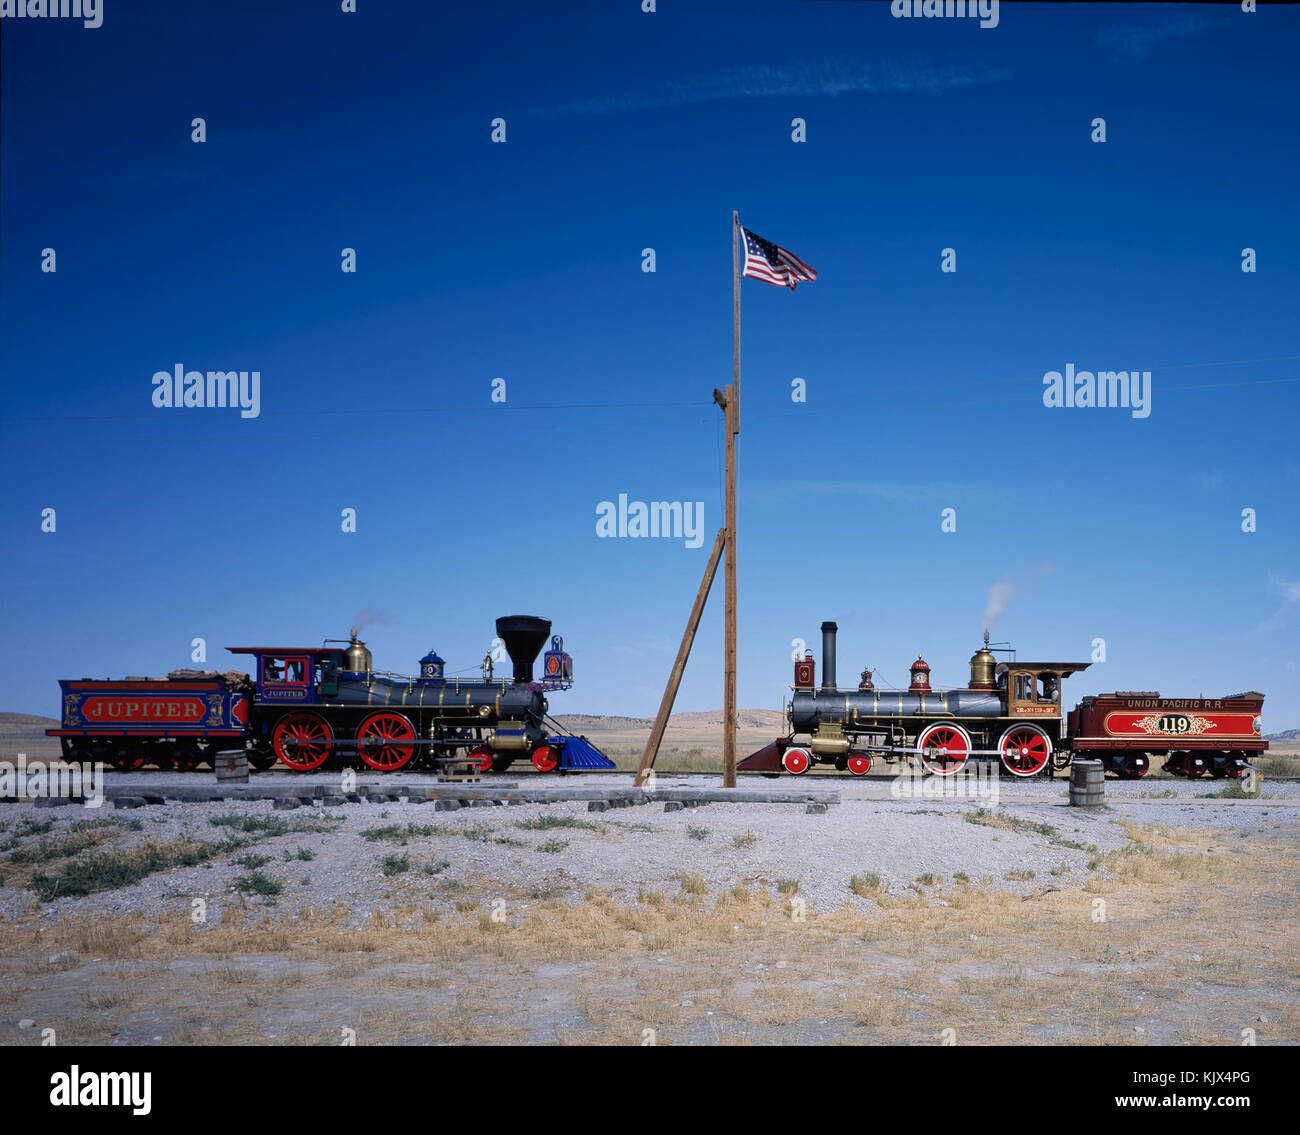 A meeting of the engines at the Golden Spike National Historic Site, Utah Stock Photo